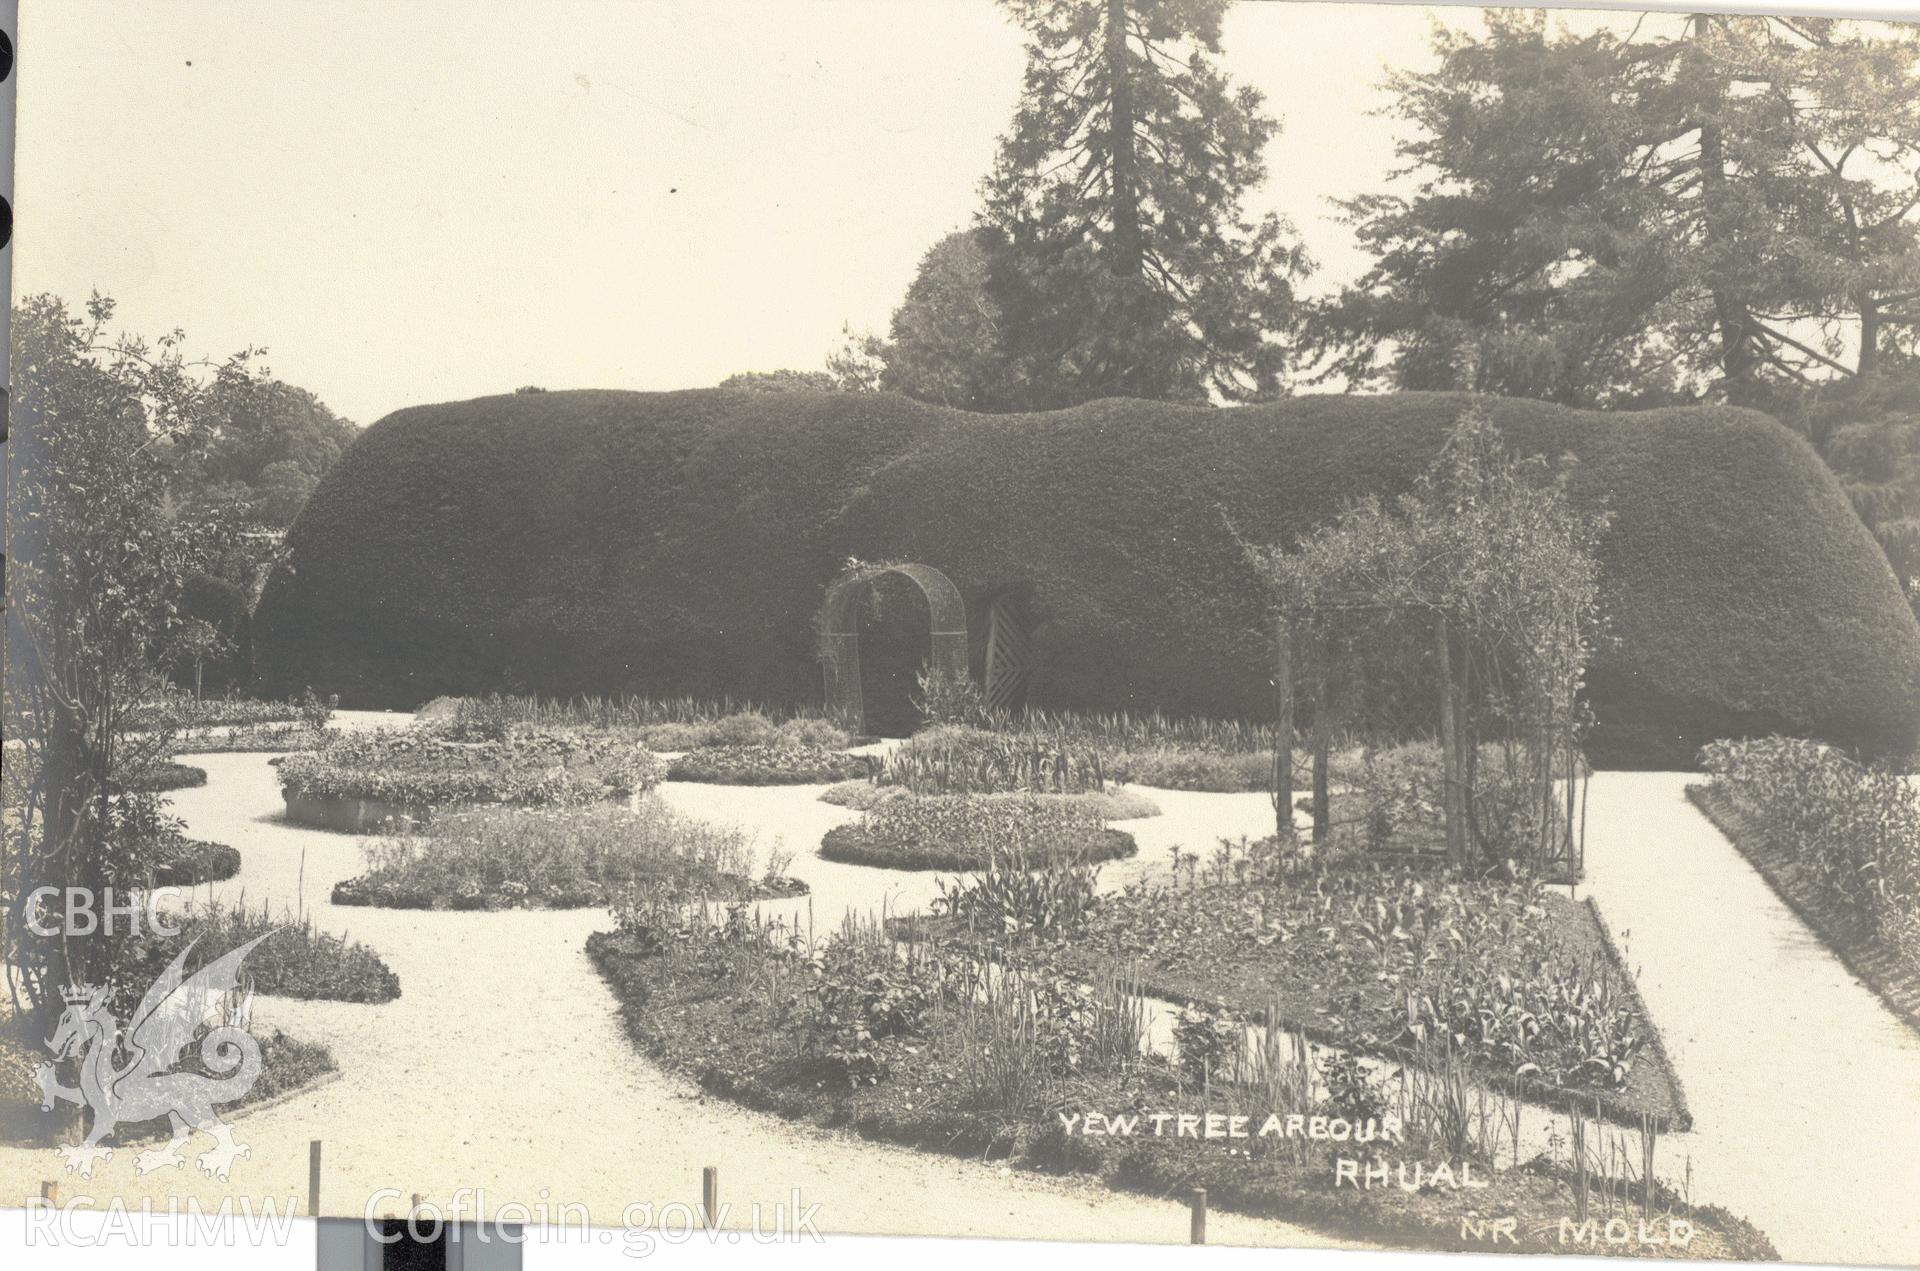 Digitised postcard image of Rhual Hall garden, Mold, including Yew Tree arbour, The "Dingle" Series Bevan, Heswall. Produced by Parks and Gardens Data Services, from an original item in the Peter Davis Collection at Parks and Gardens UK. We hold only web-resolution images of this collection, suitable for viewing on screen and for research purposes only. We do not hold the original images, or publication quality scans.